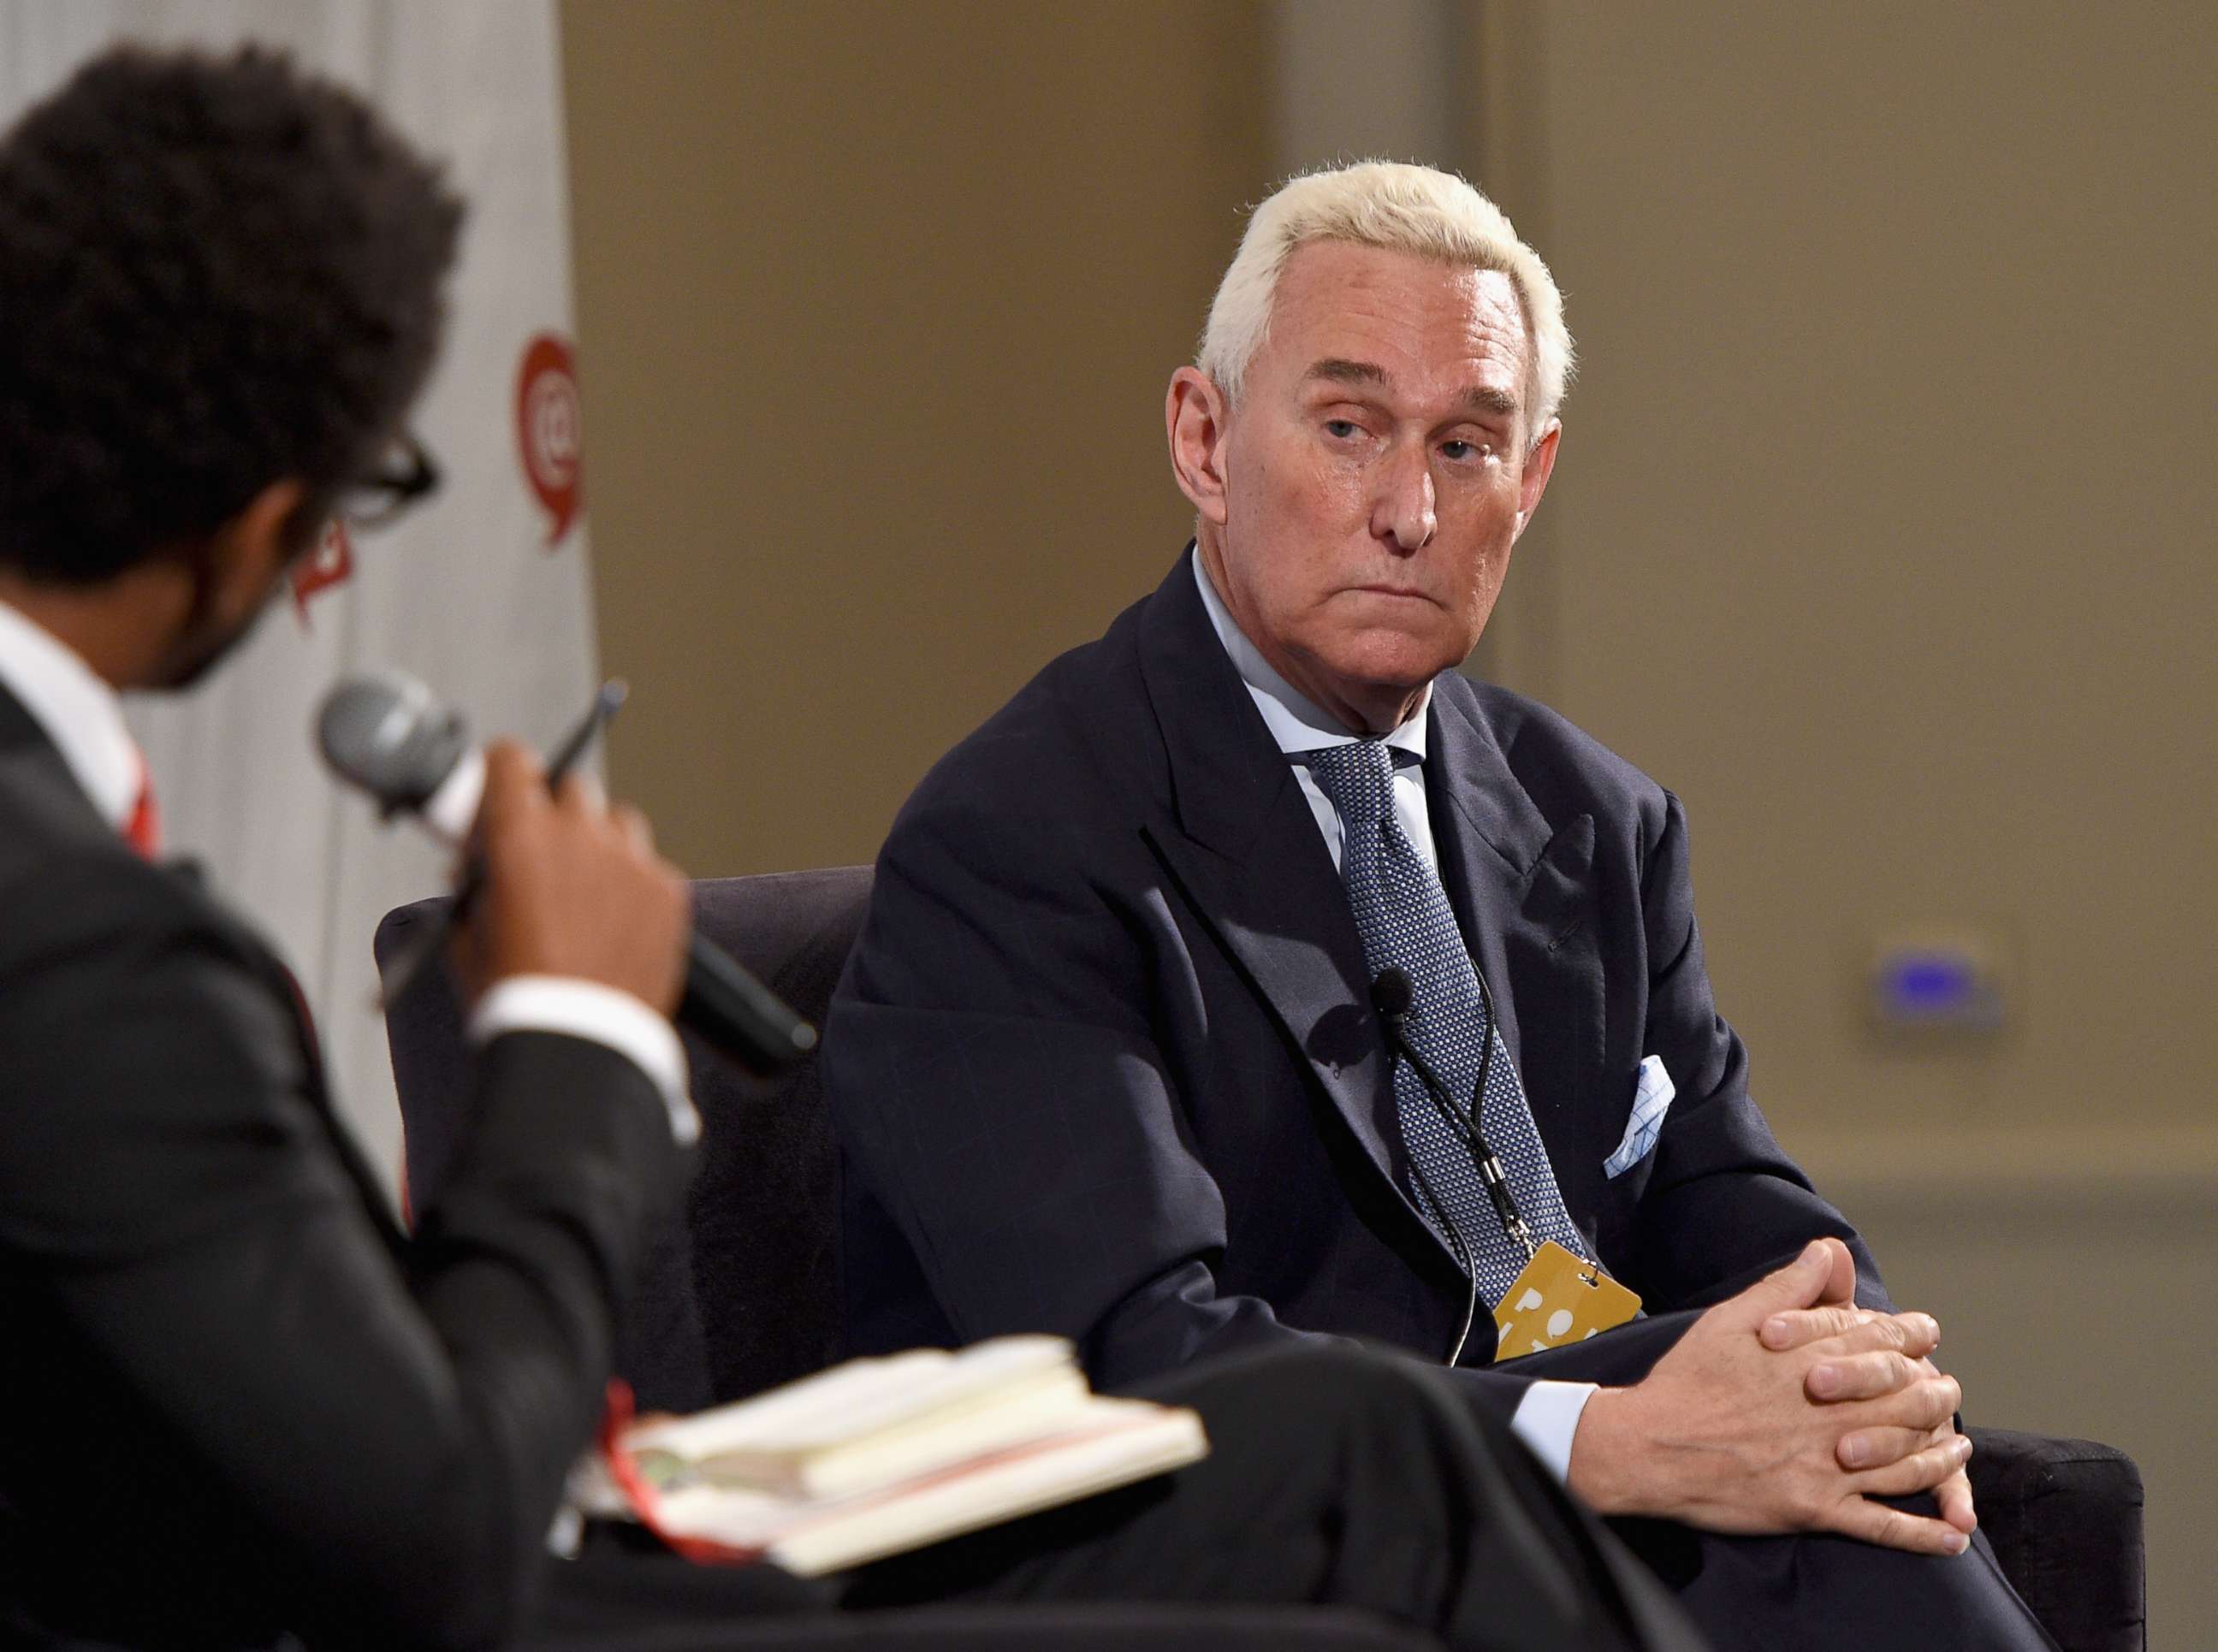 PHOTO: Roger Stone speaks at the Pasadena Convention Center on July 30, 2017 in Pasadena, Calif.